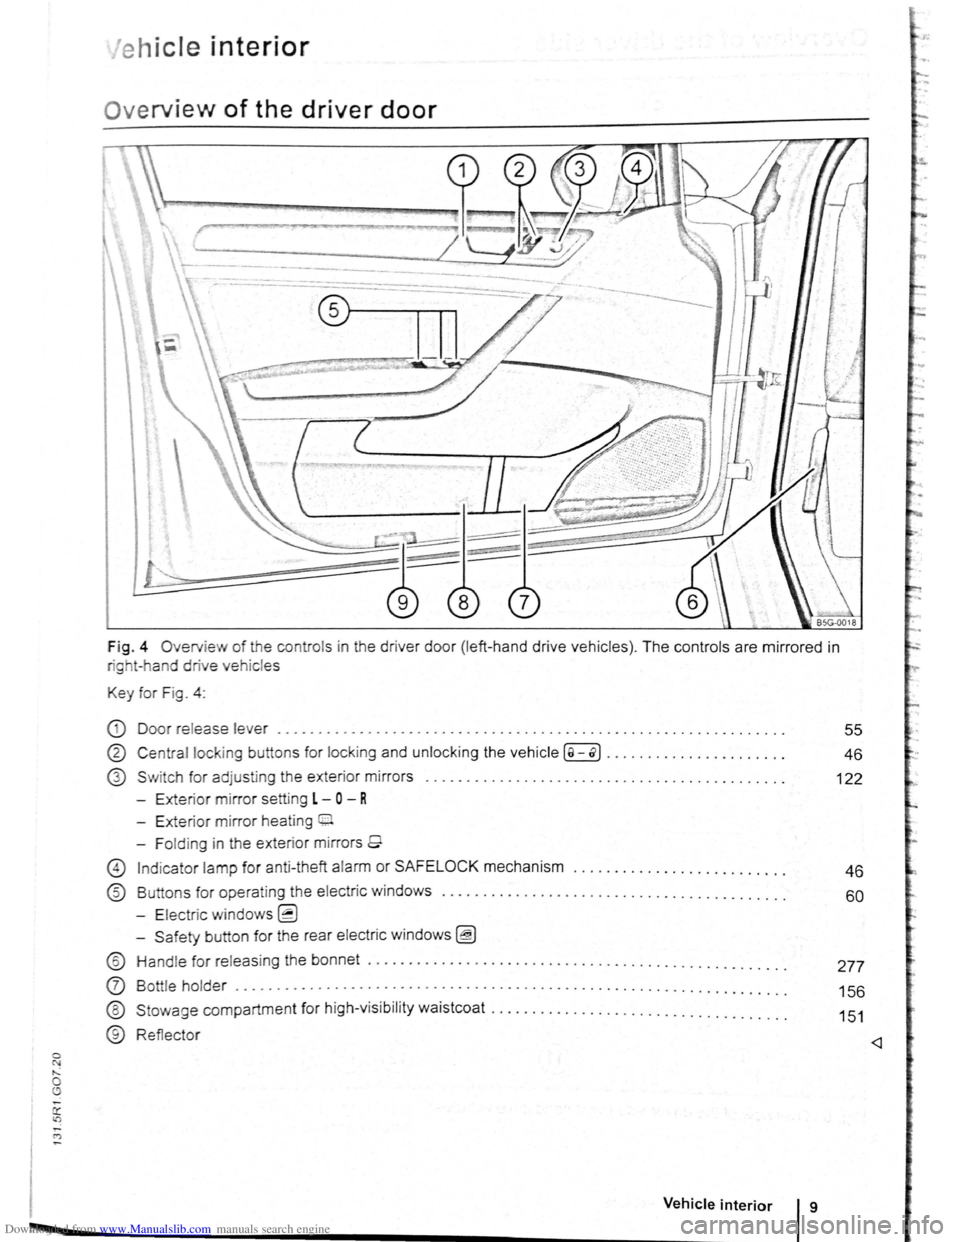 VOLKSWAGEN GOLF PLUS 2011  Owner´s Manual Downloaded from www.Manualslib.com manuals search engine 0 N ,..; 0 
e h ic le interior 
Ov erview of the driver door 
Fig . 4 Overv ie w of the  contro ls  in  the drive r doo r (left -ha nd  dr ive